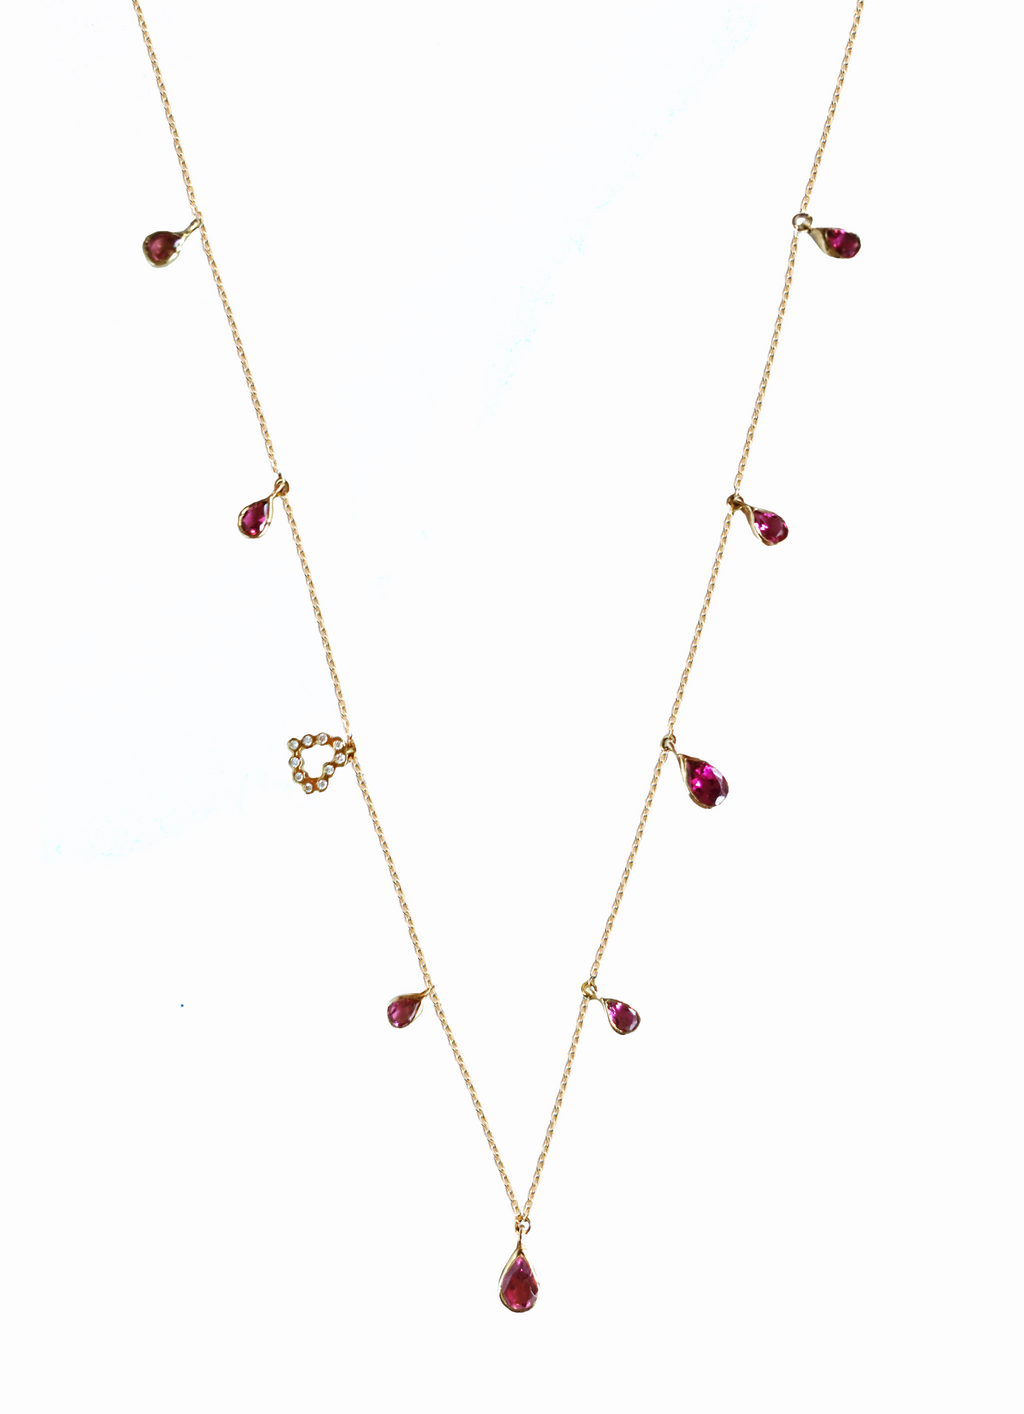 Short Pink Tourmaline Necklace With Diamond Heart Charm